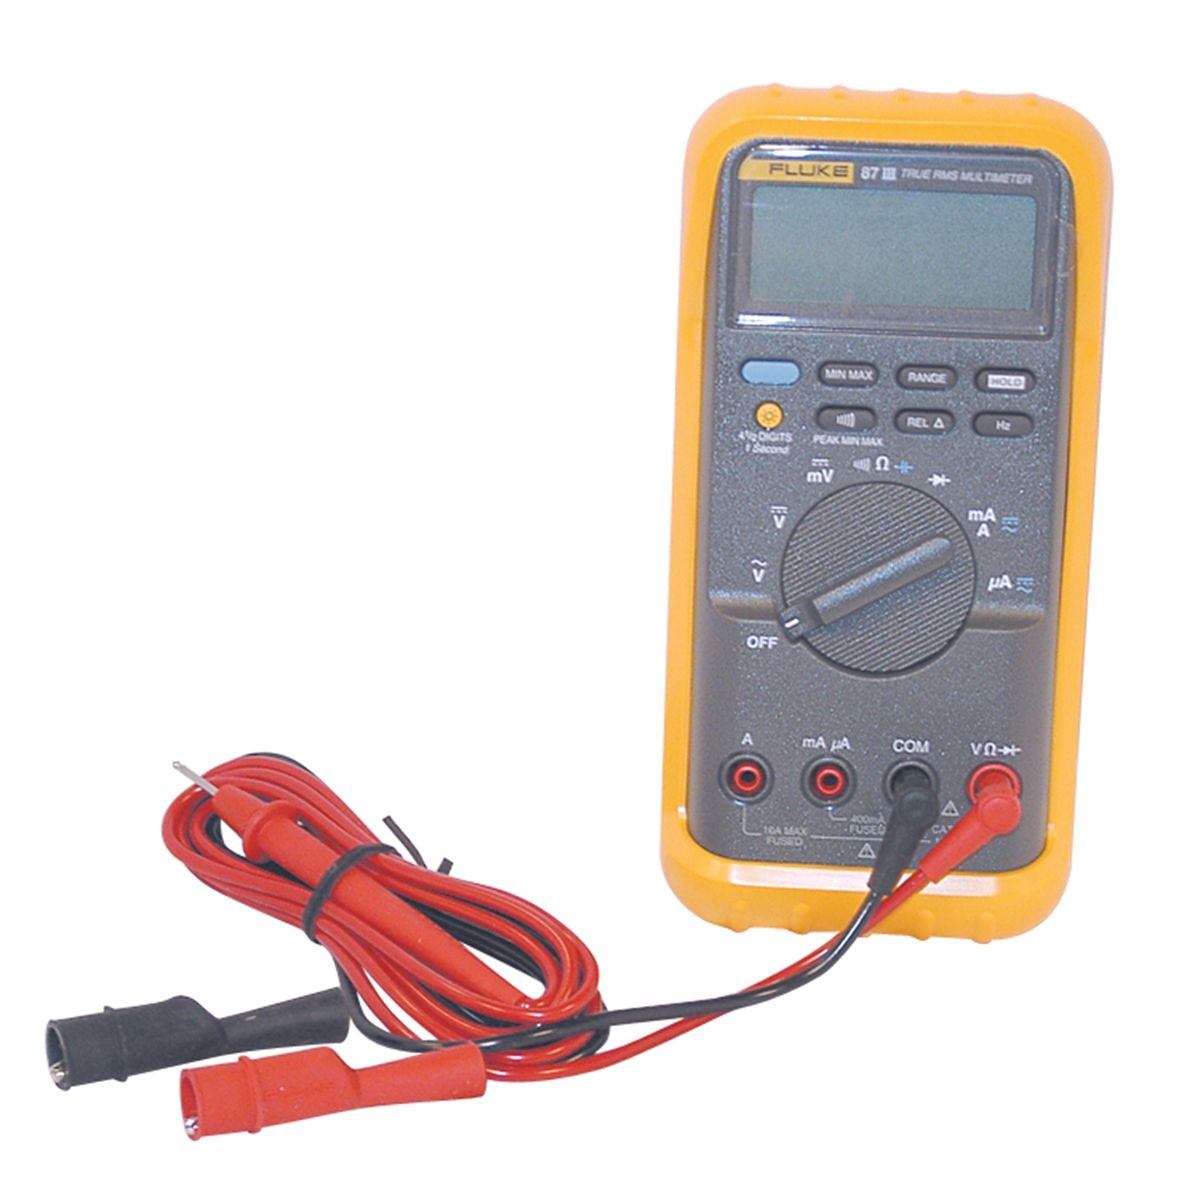 Fluke 87V Multimeter Review  Industrial Features - Pro Tool Reviews